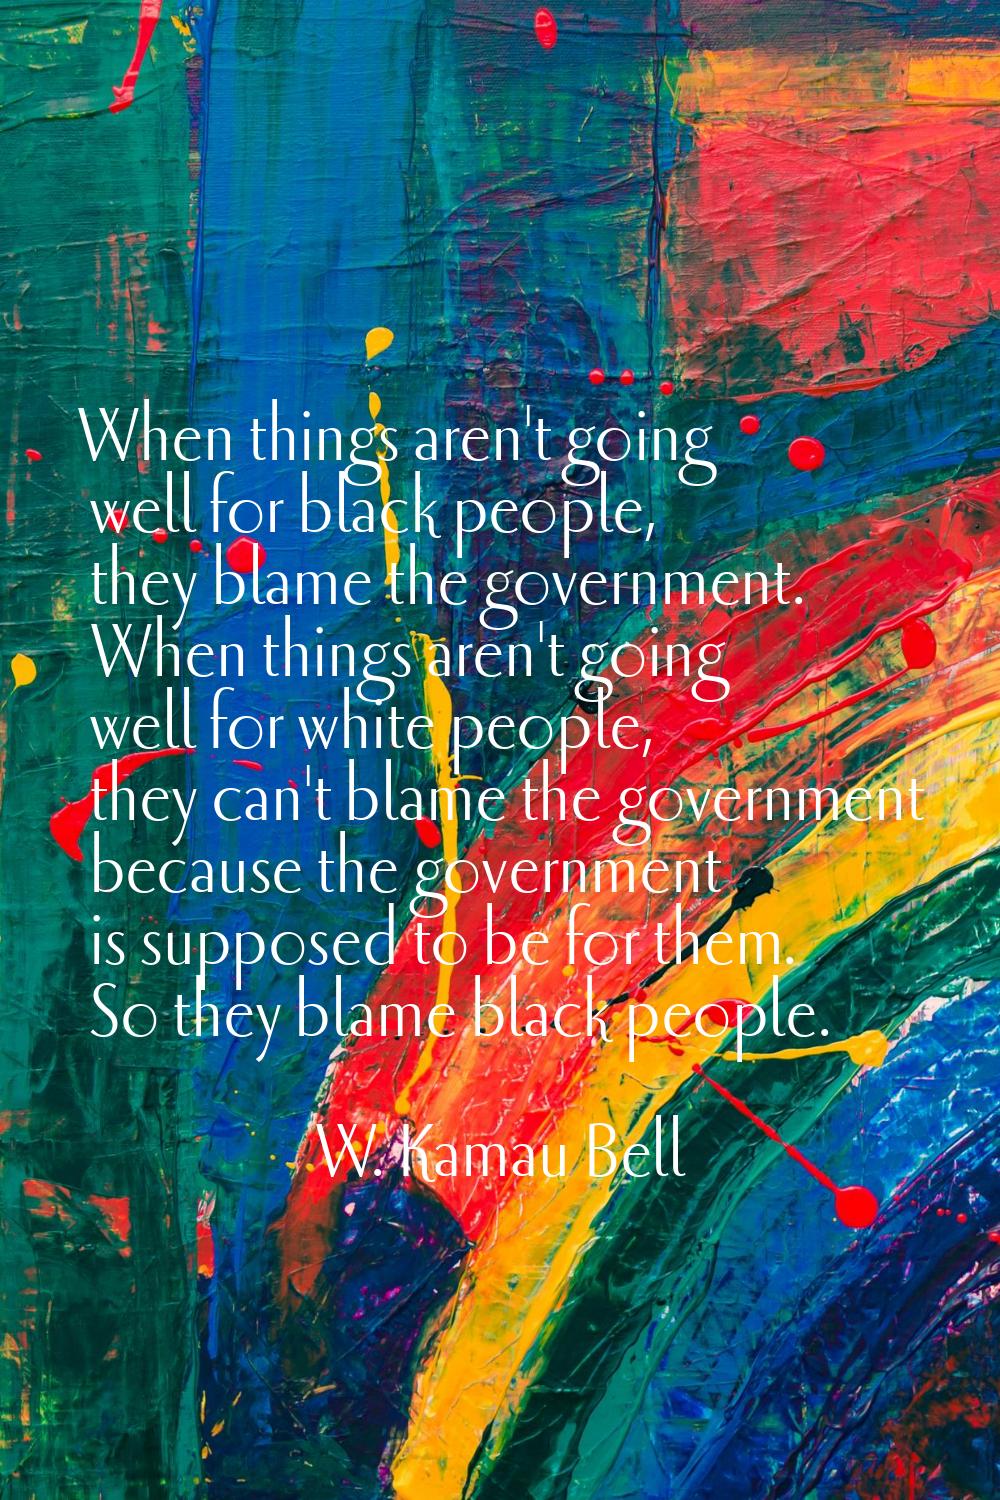 When things aren't going well for black people, they blame the government. When things aren't going